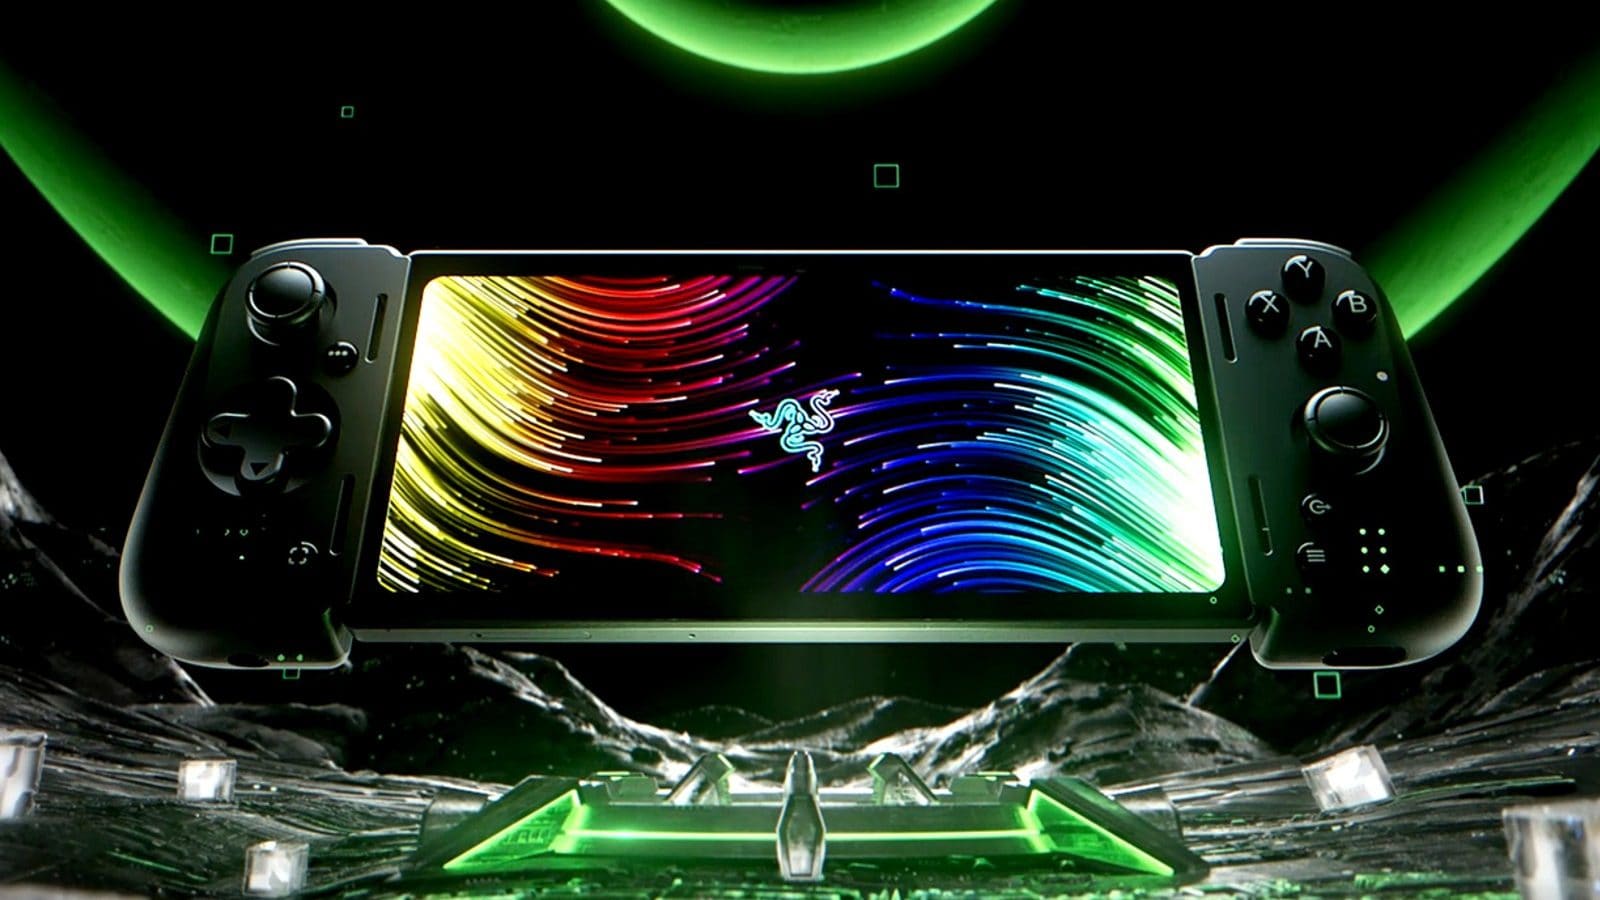 Razer Edge Handheld Console Powered By Android Launched Price, Features